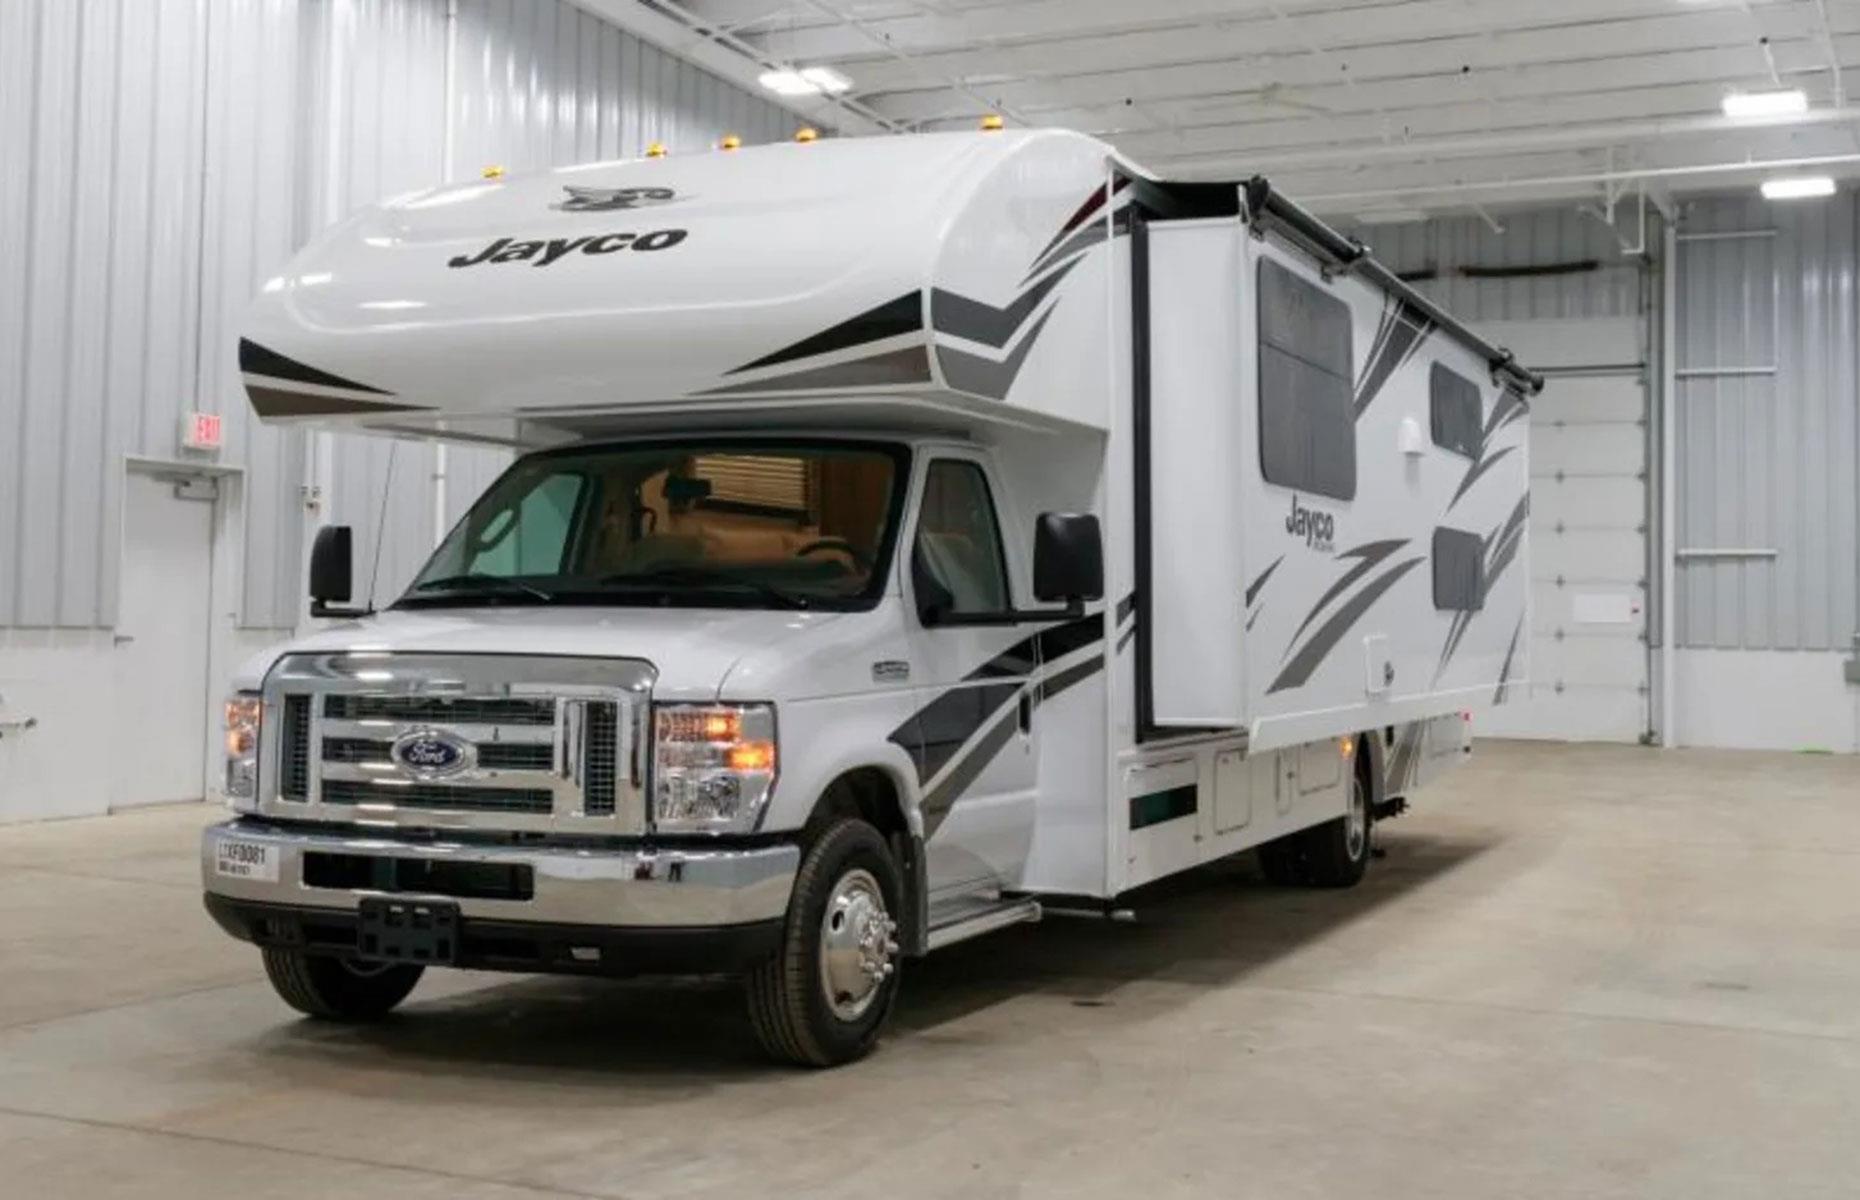 Invite the whole family on this Class C motorhome – at 32 feet long (10m) and seven feet (2m) high, the spacious RV can comfortably accommodate up to eight guests, perfect for a large family. The Jayco Redhawk comes fully equipped with all the luxury modern amenities you’d need for a road trip.